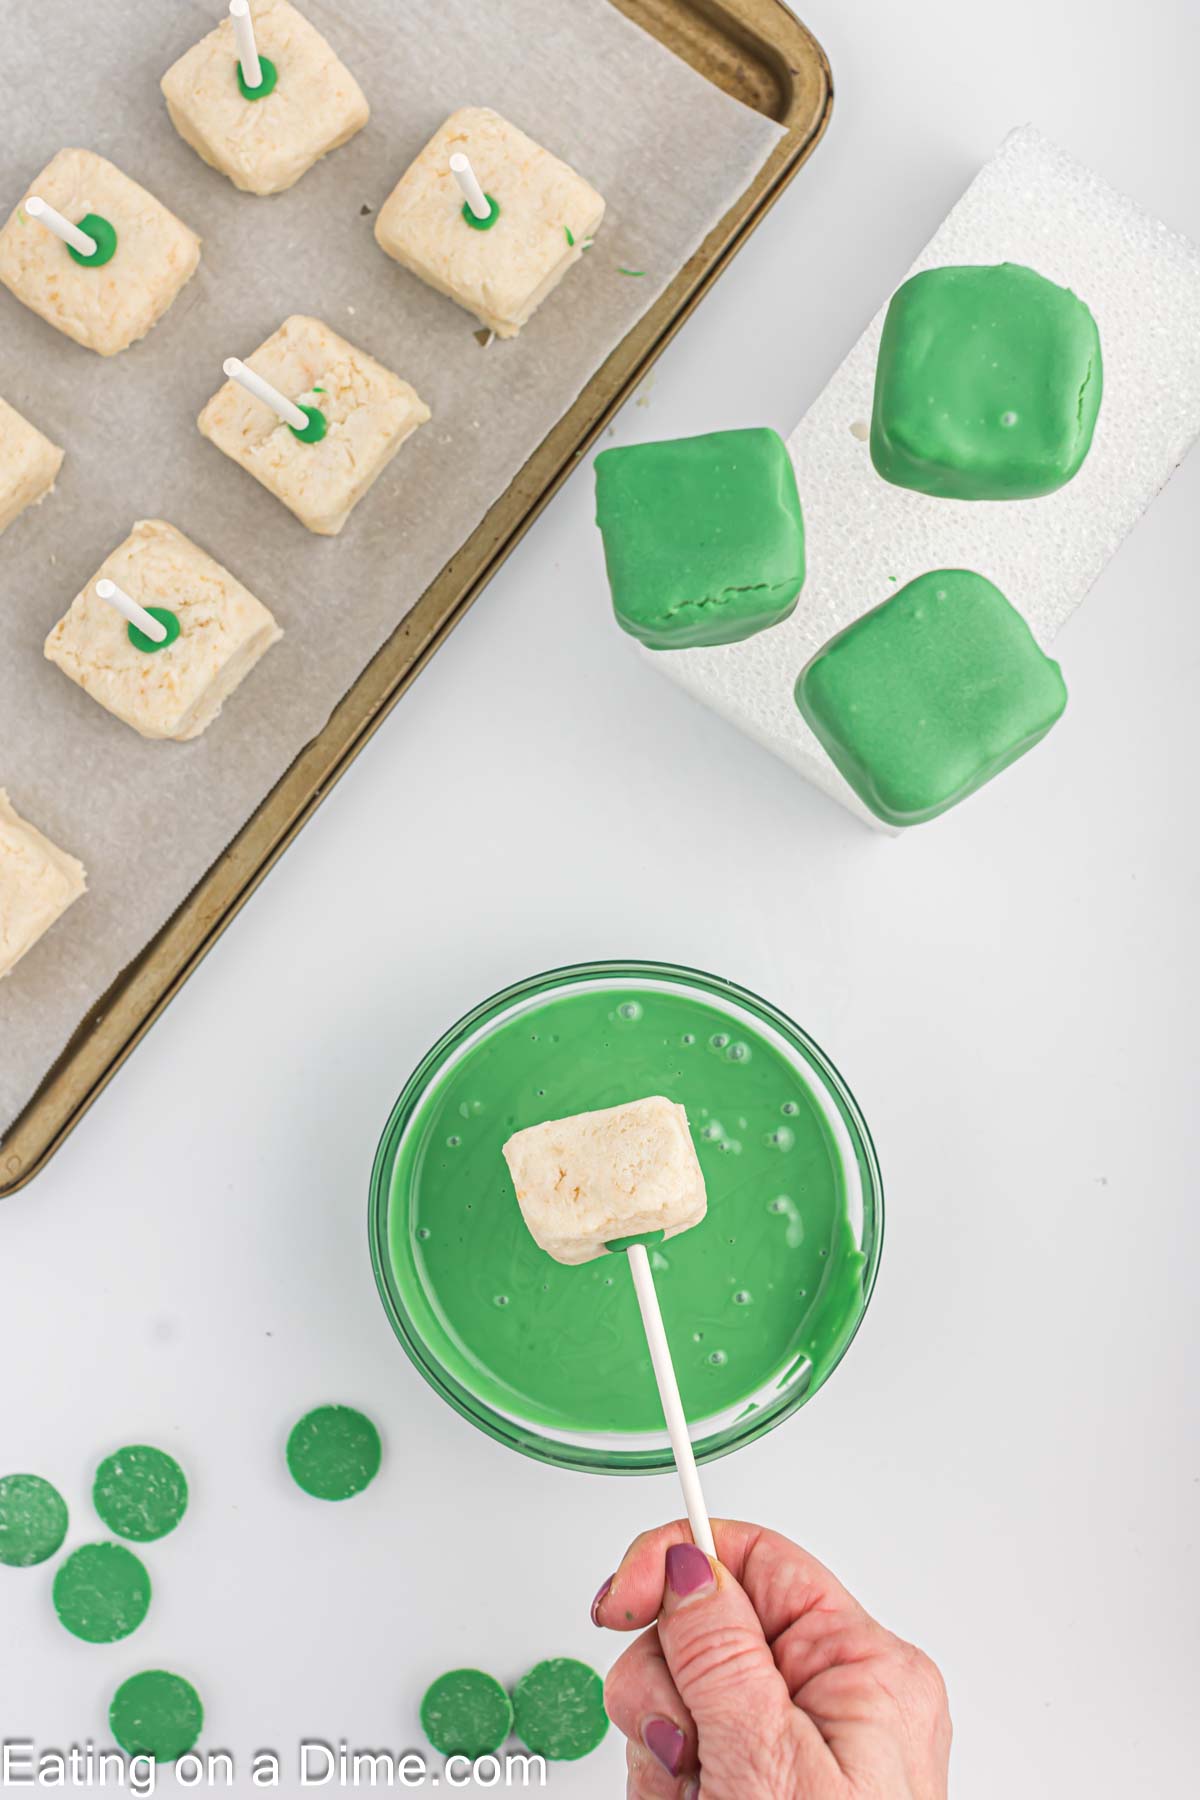 Dipping the square cake pops into the melted green chocolate